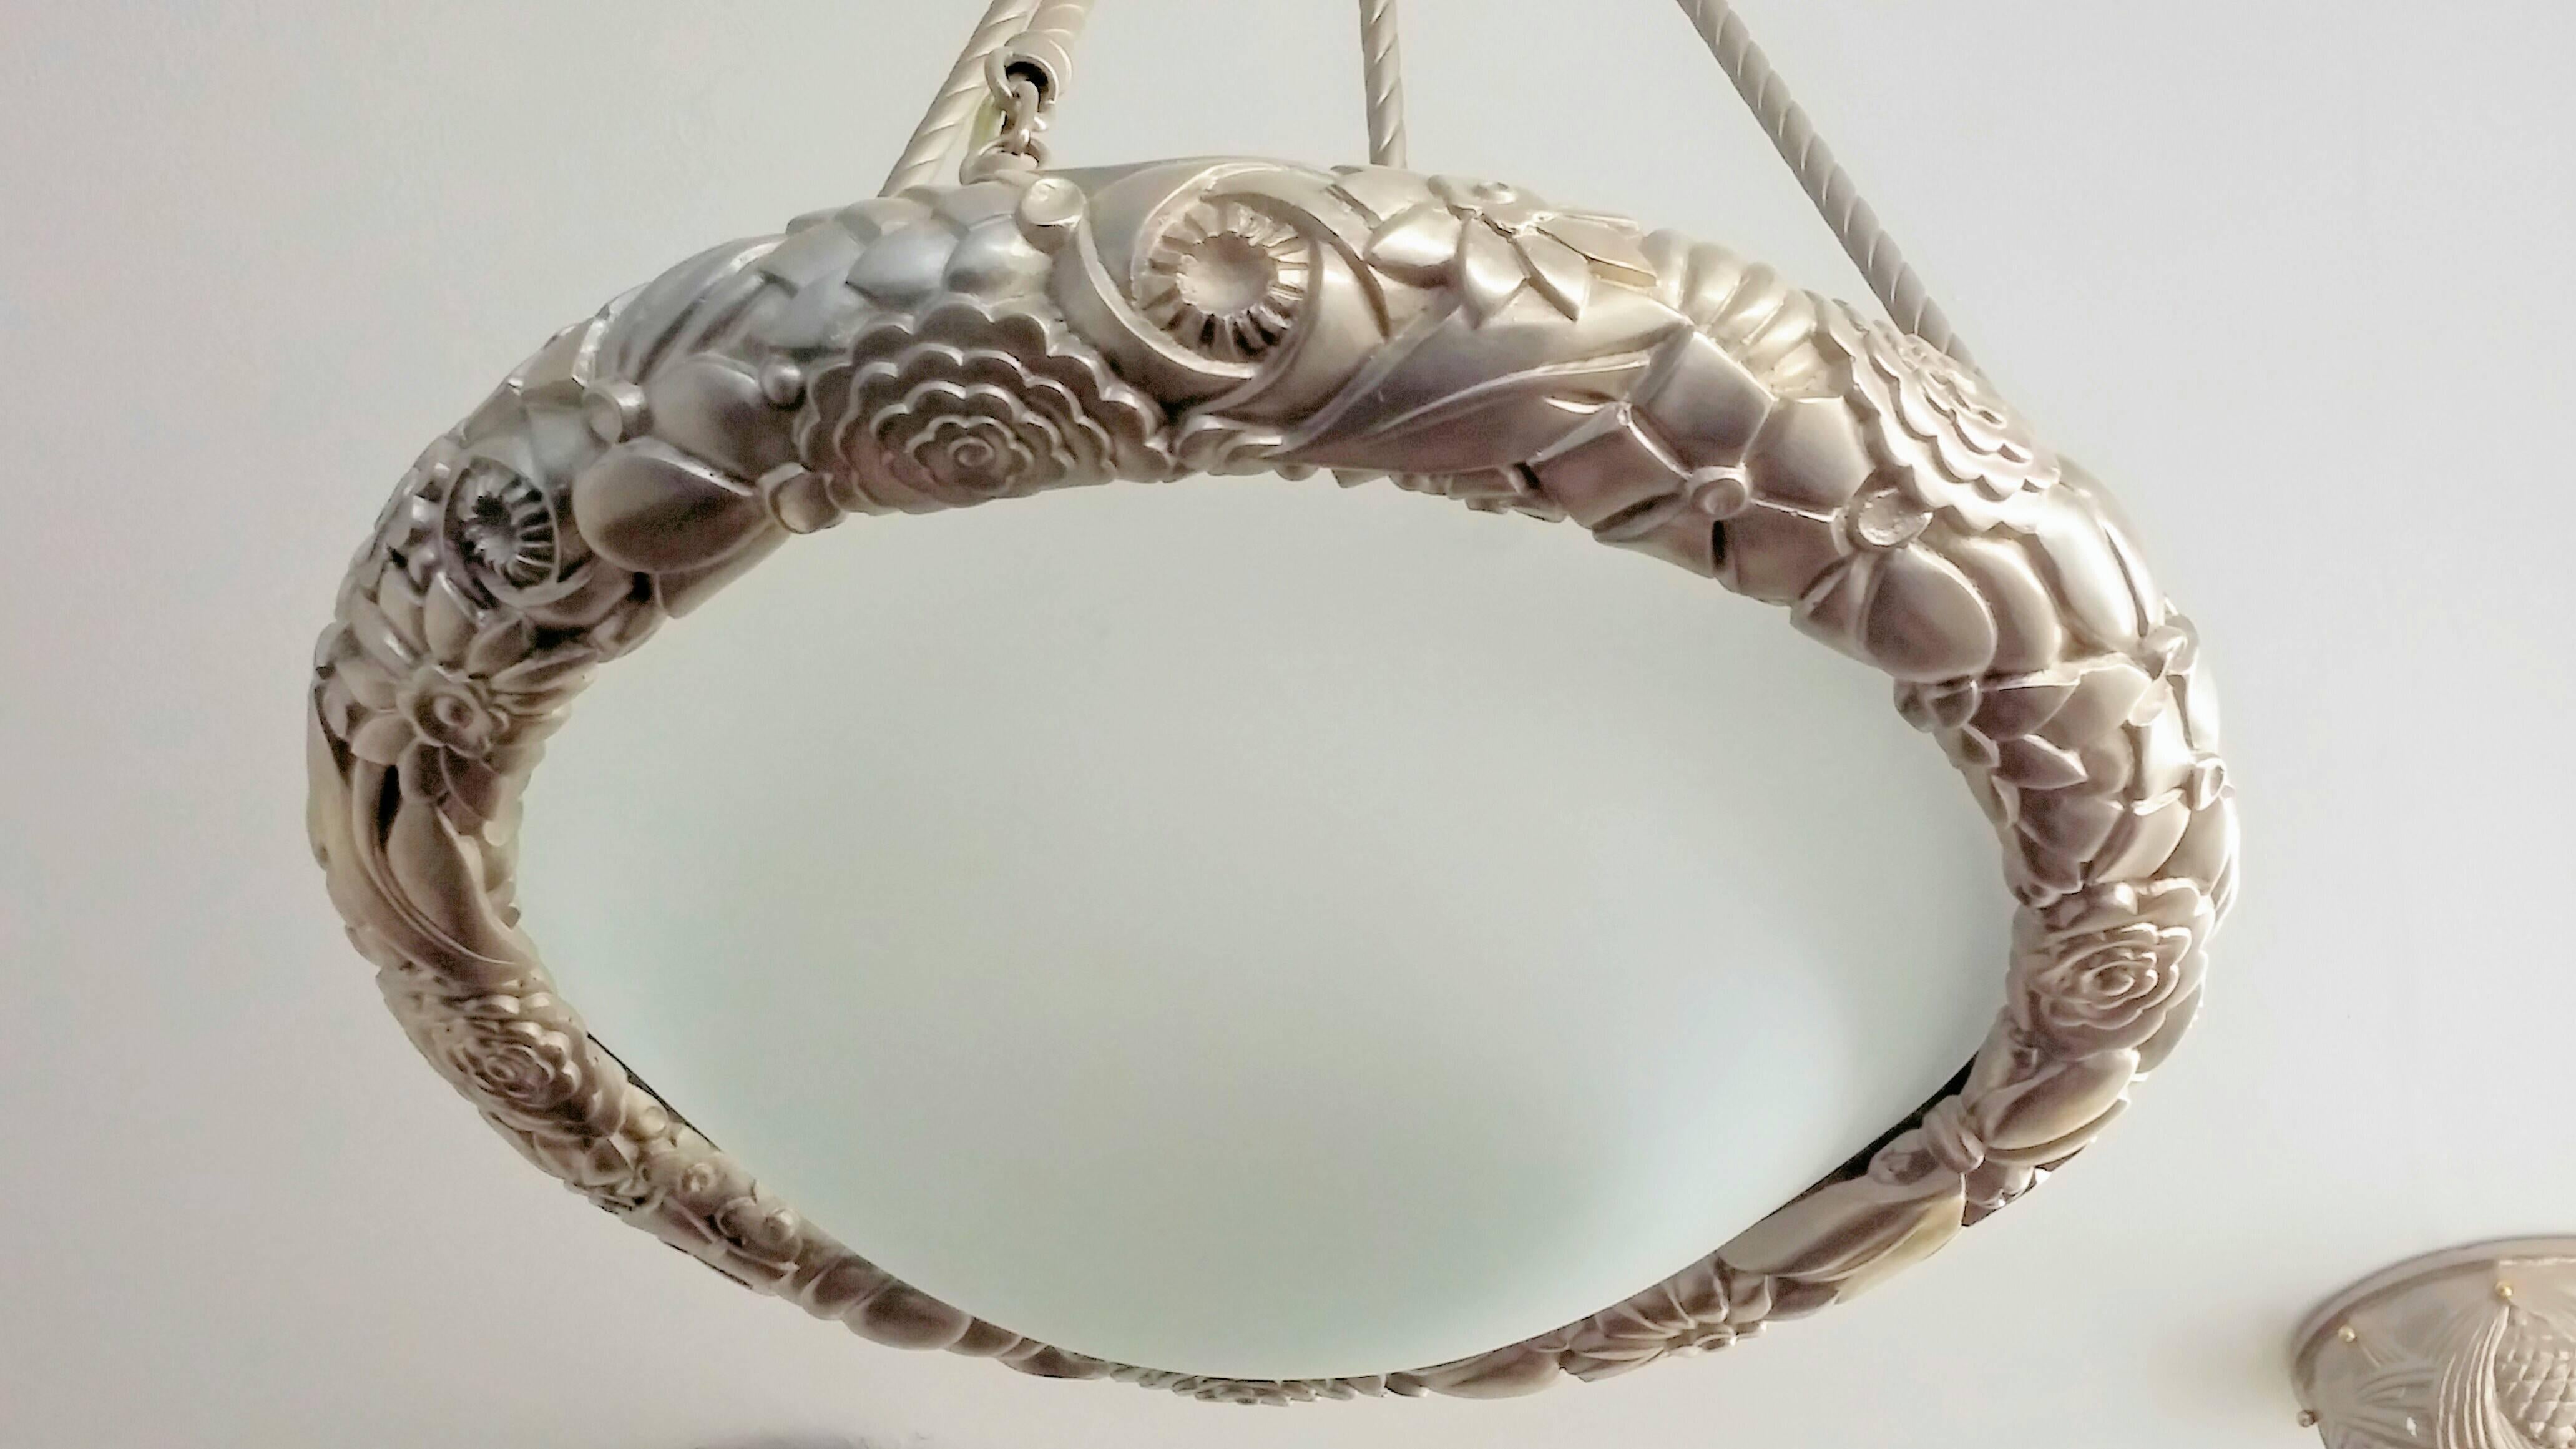 
A French Art Deco flower sphere pendant chandelier with intricate flower motif details, enhanced by concave frosted glass shade supported by four rods rope design with a smooth canopy in satin nickel. Fixtures can be re-plated, extended or